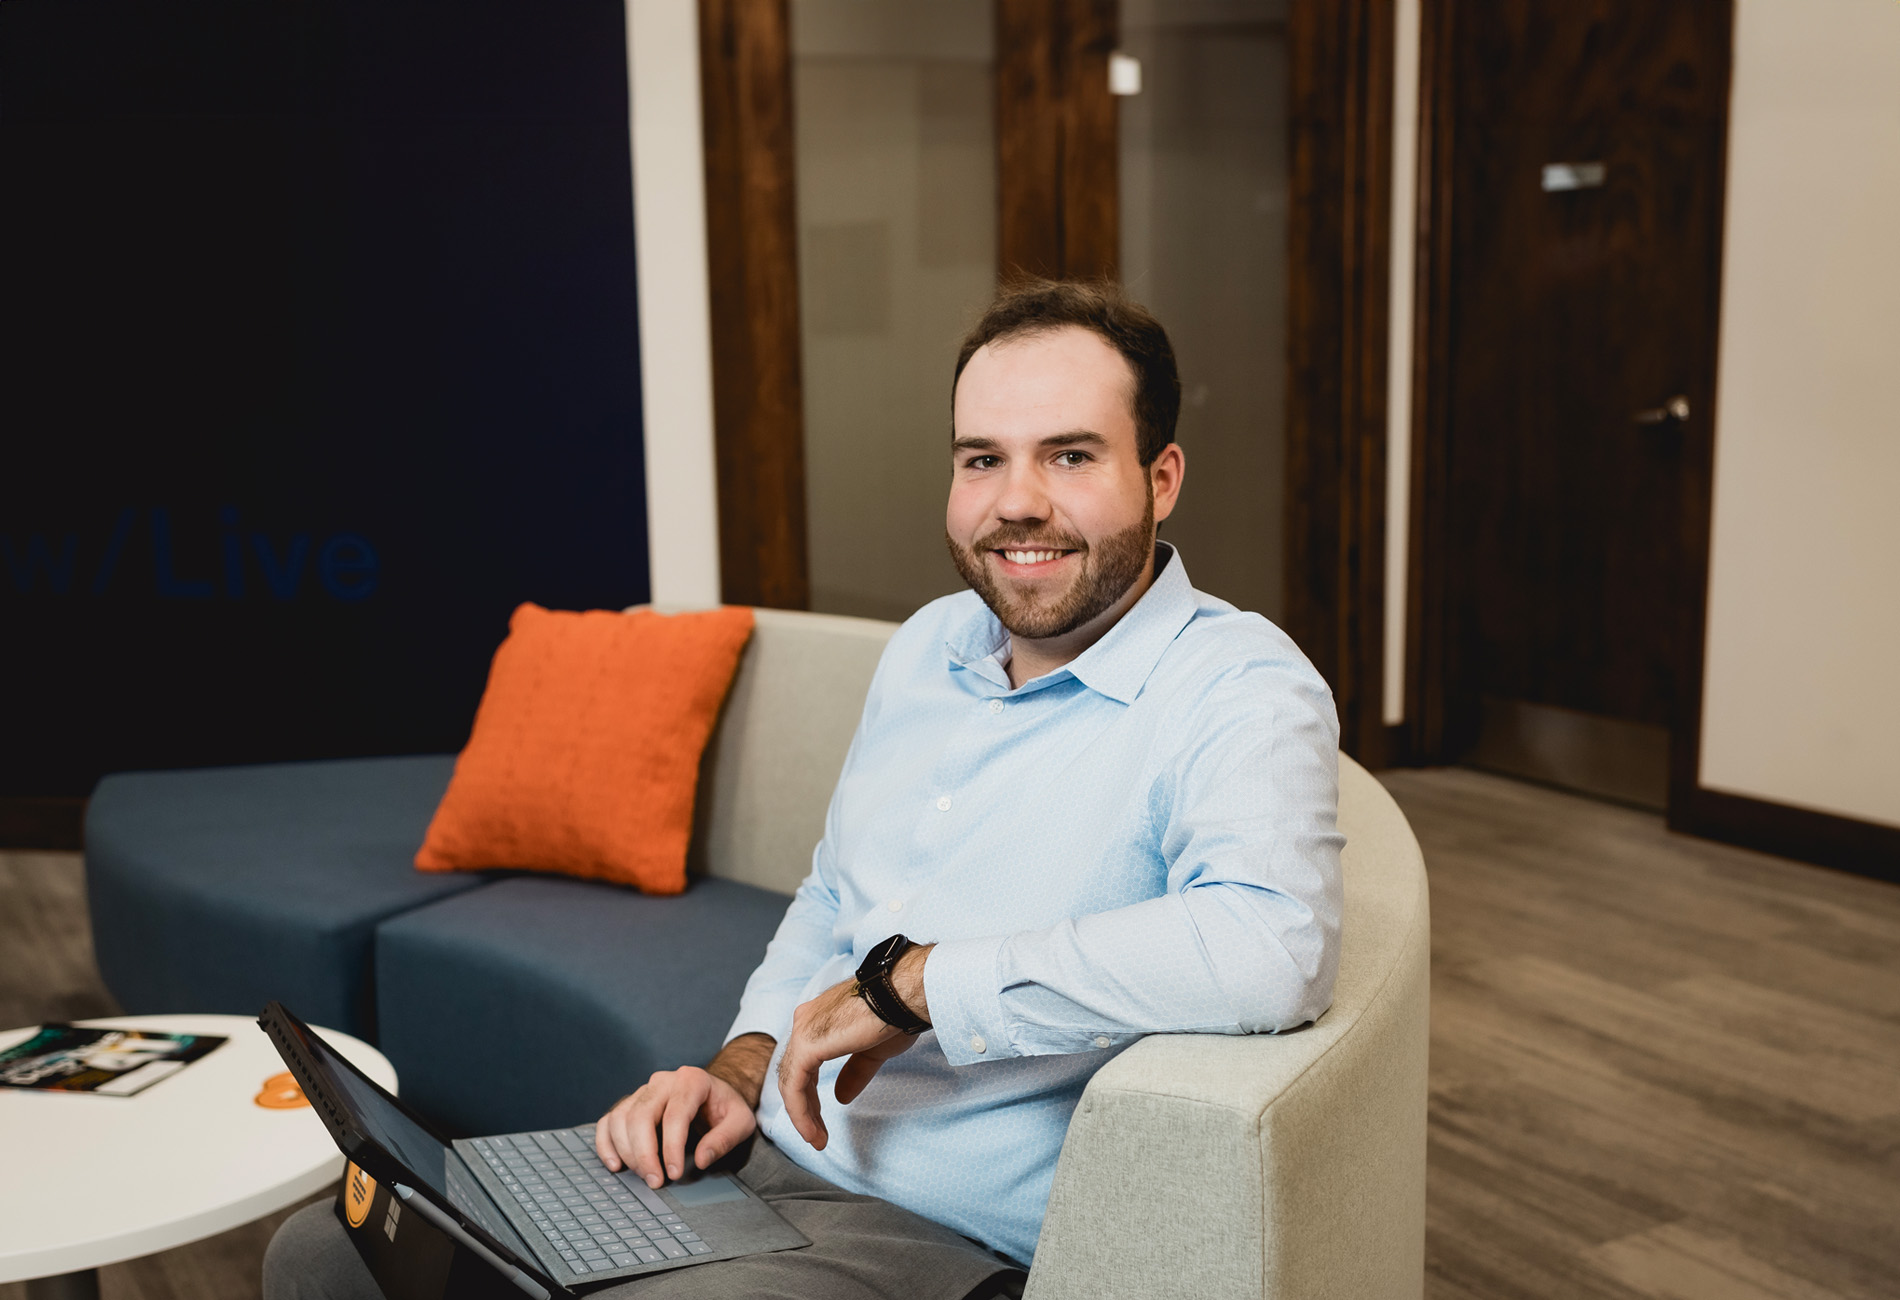 Ben Petell, Associate Financial Advisor: A man with short brown hair and a beard wearing a blue shirt. Working on his computer sitting on a couch. Strategic Advisor Team bio page headshot.